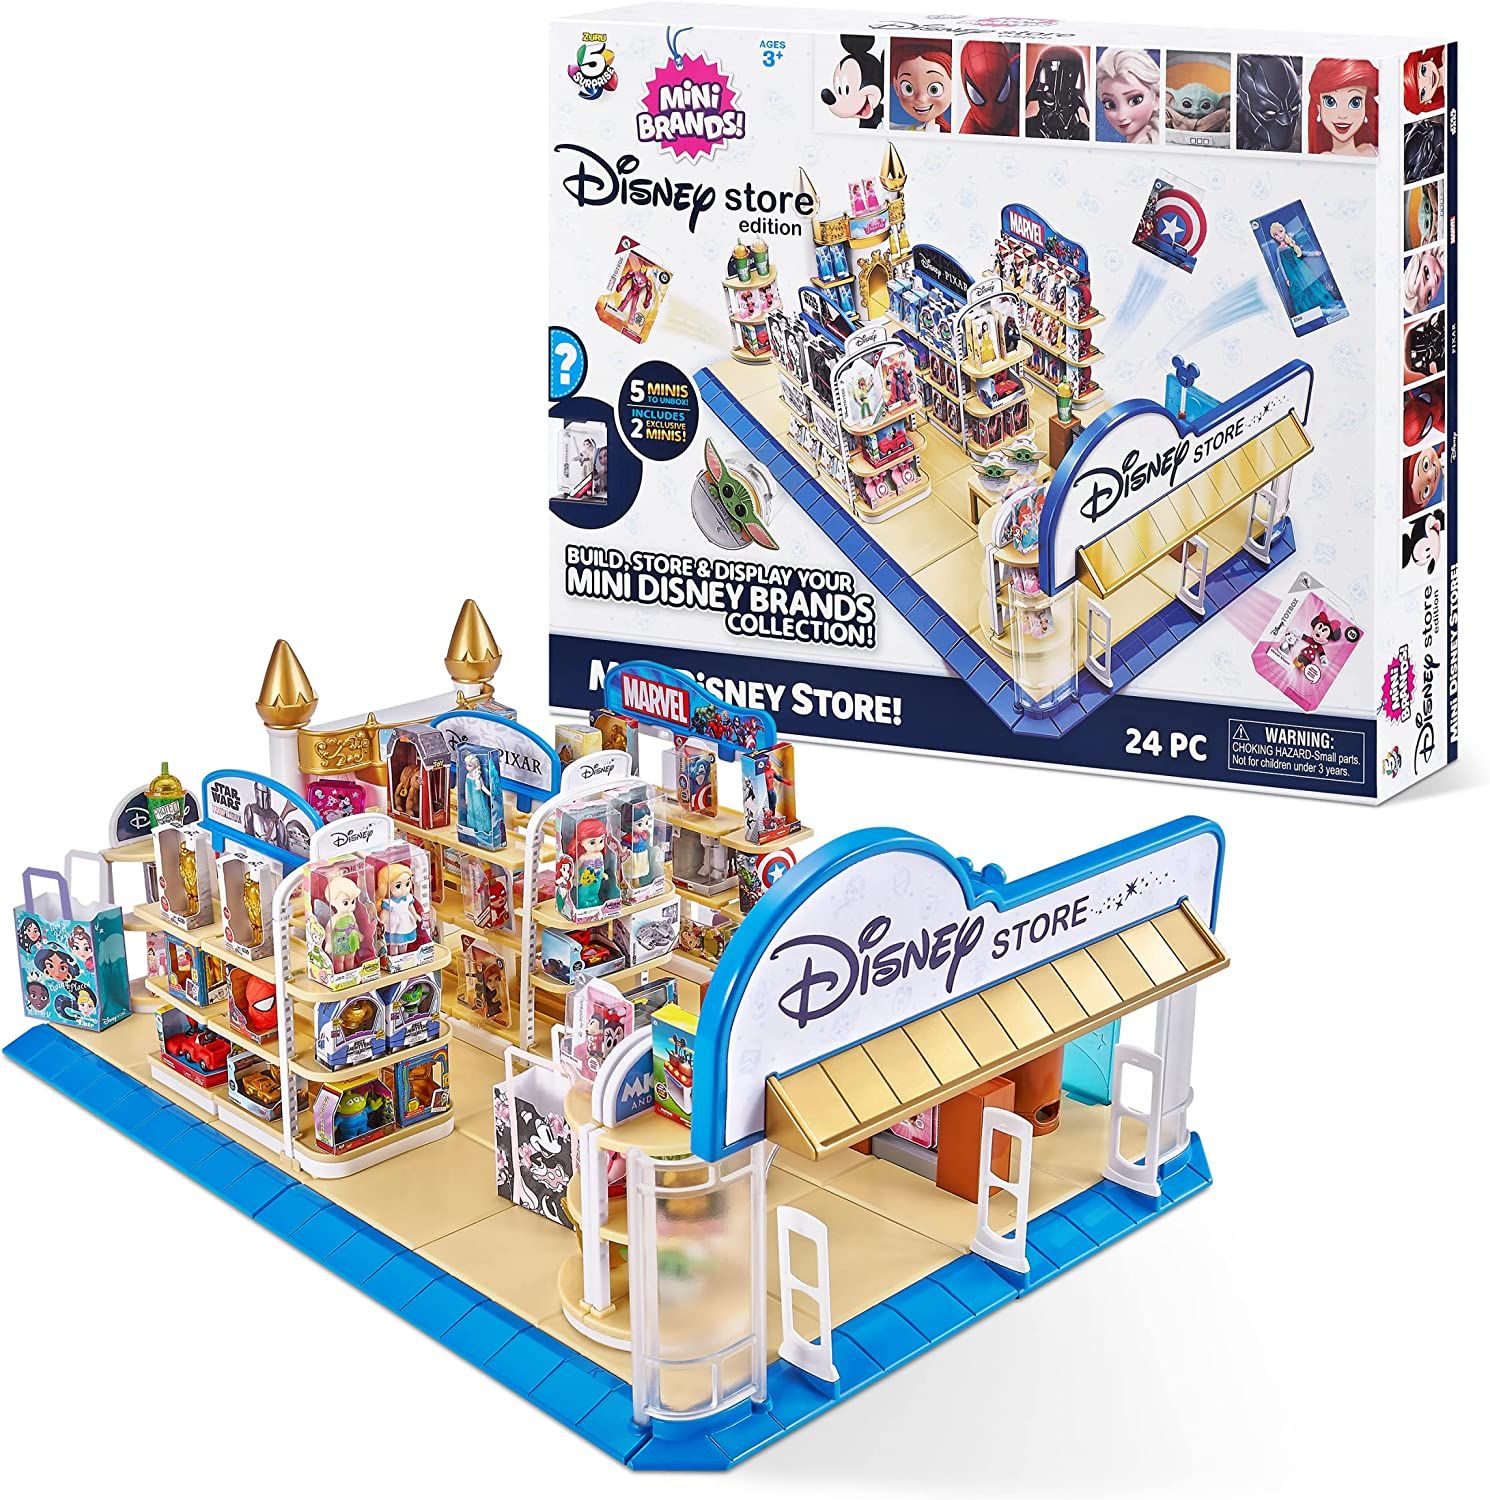 Disney Store Display for 5 Surprise Mini Brands collectibles